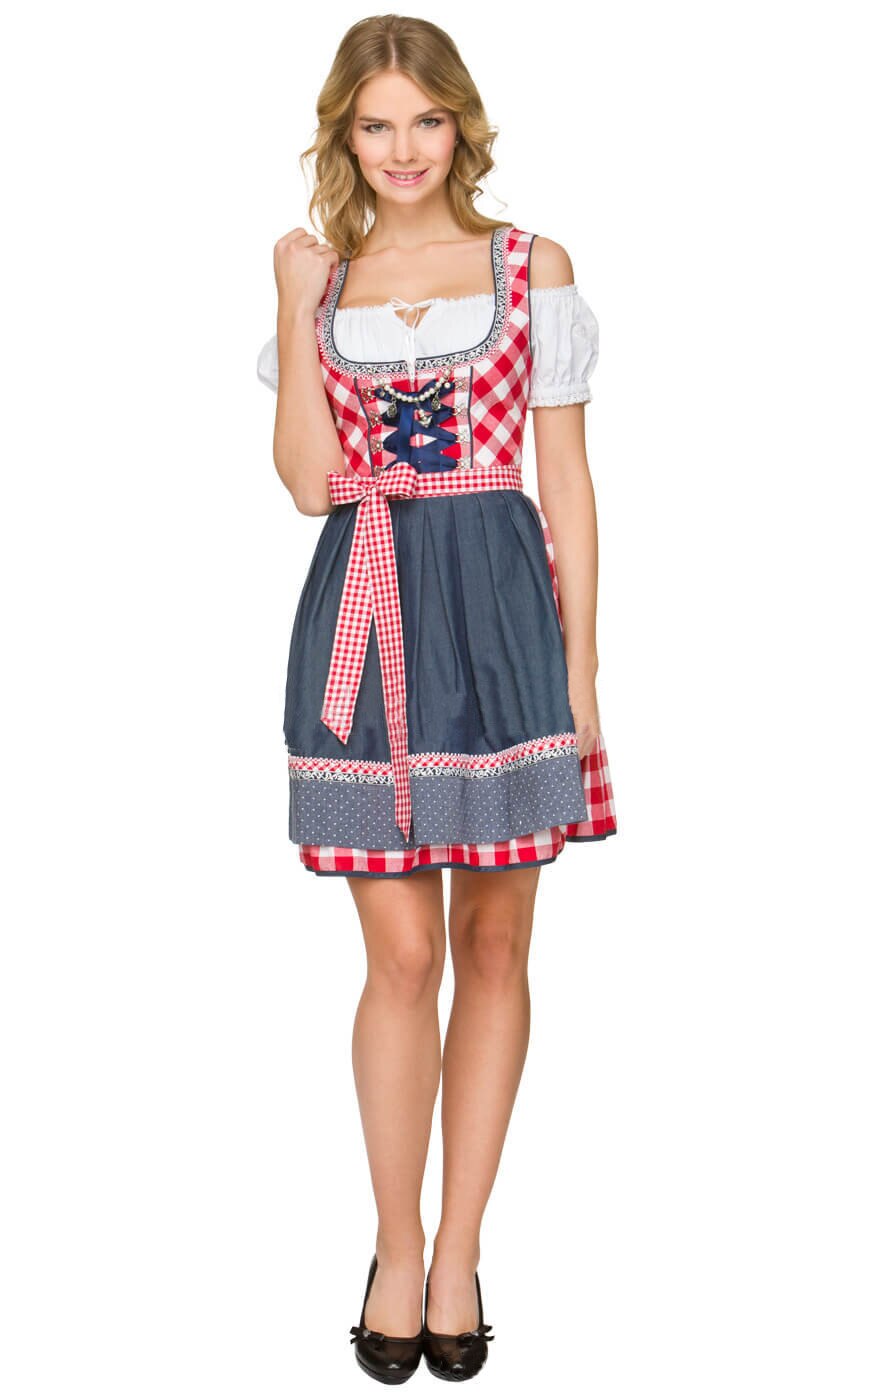 Ladies Deluxe Oktoberfest Costume Traditional Dirndl Dress Apron Set Cosplay Germany Beer Wench Outfit Halloween Fancy Dress